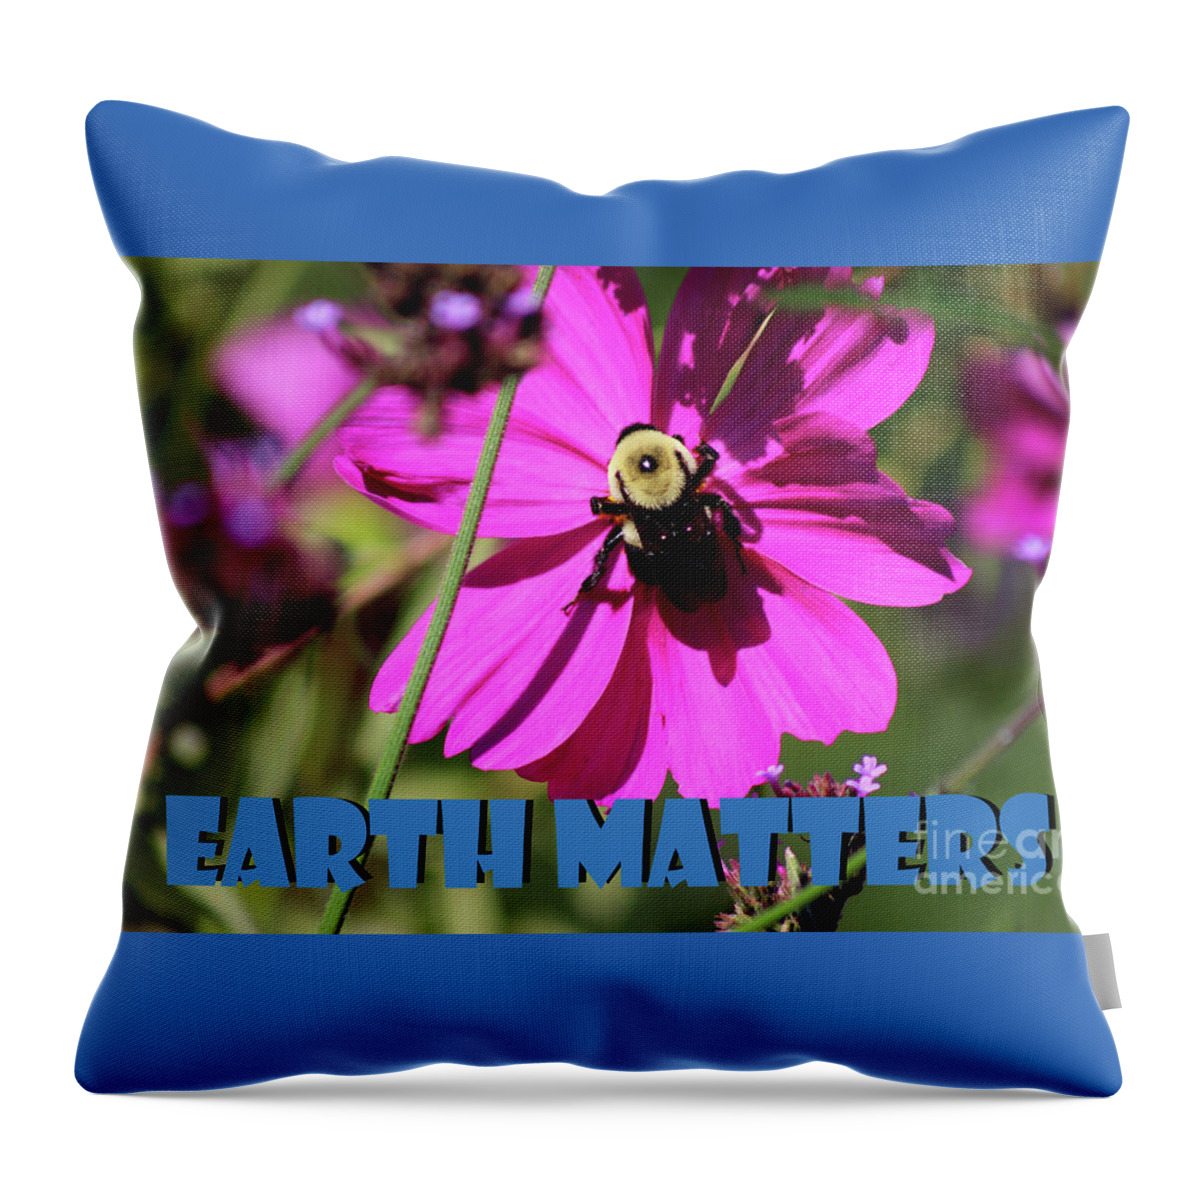 Bumblebee Throw Pillow featuring the photograph Earth Matters to Bees by Karen Adams